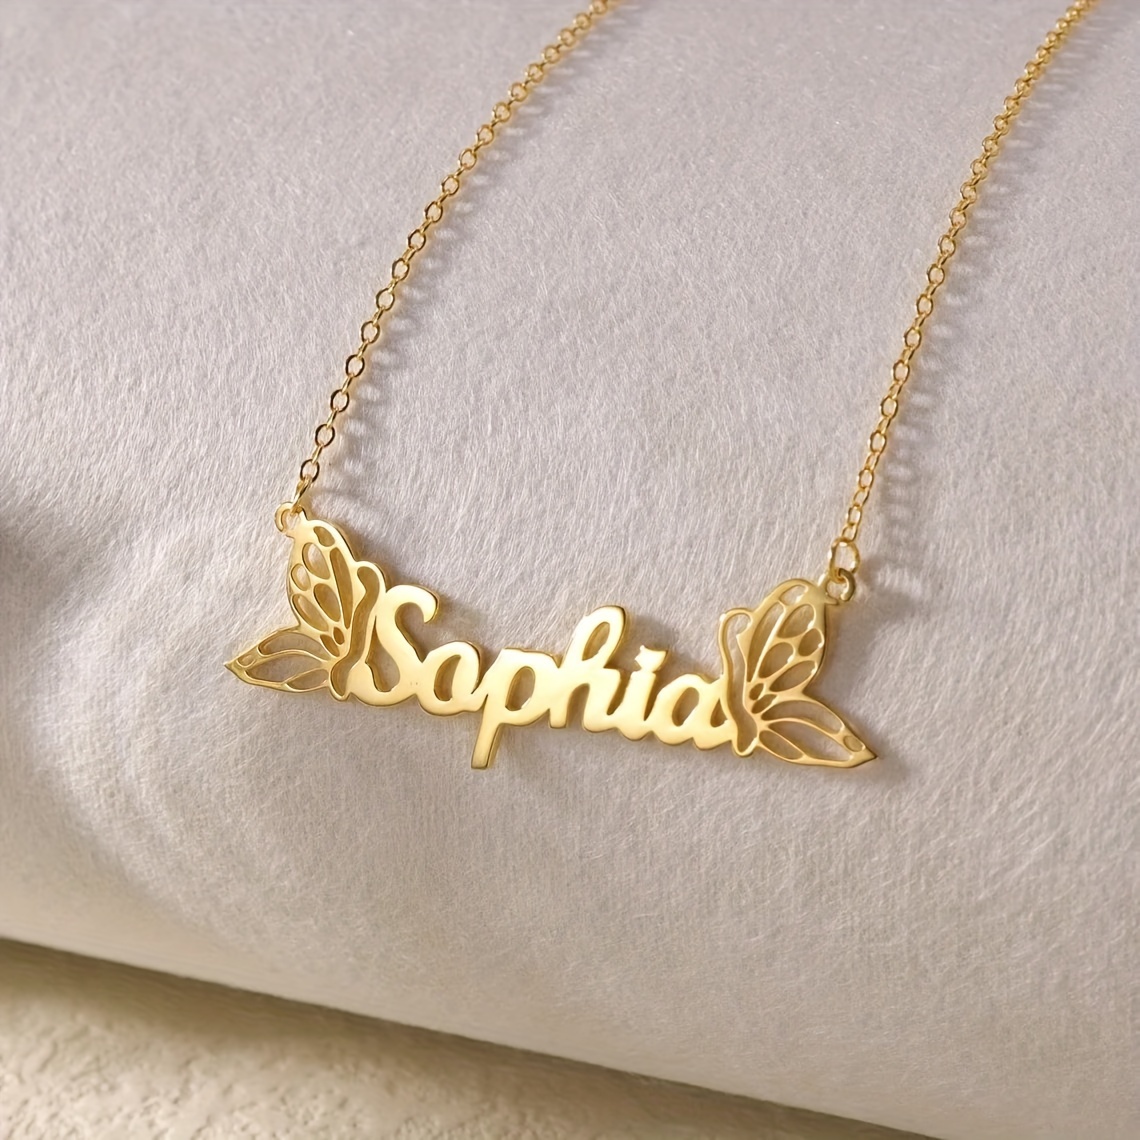 

Stainless Steel Custom English Letter Butterfly Pendant Necklace Personalized Cute Nameplate Neck Chain Jewelry Best Daily Accessories (only English)